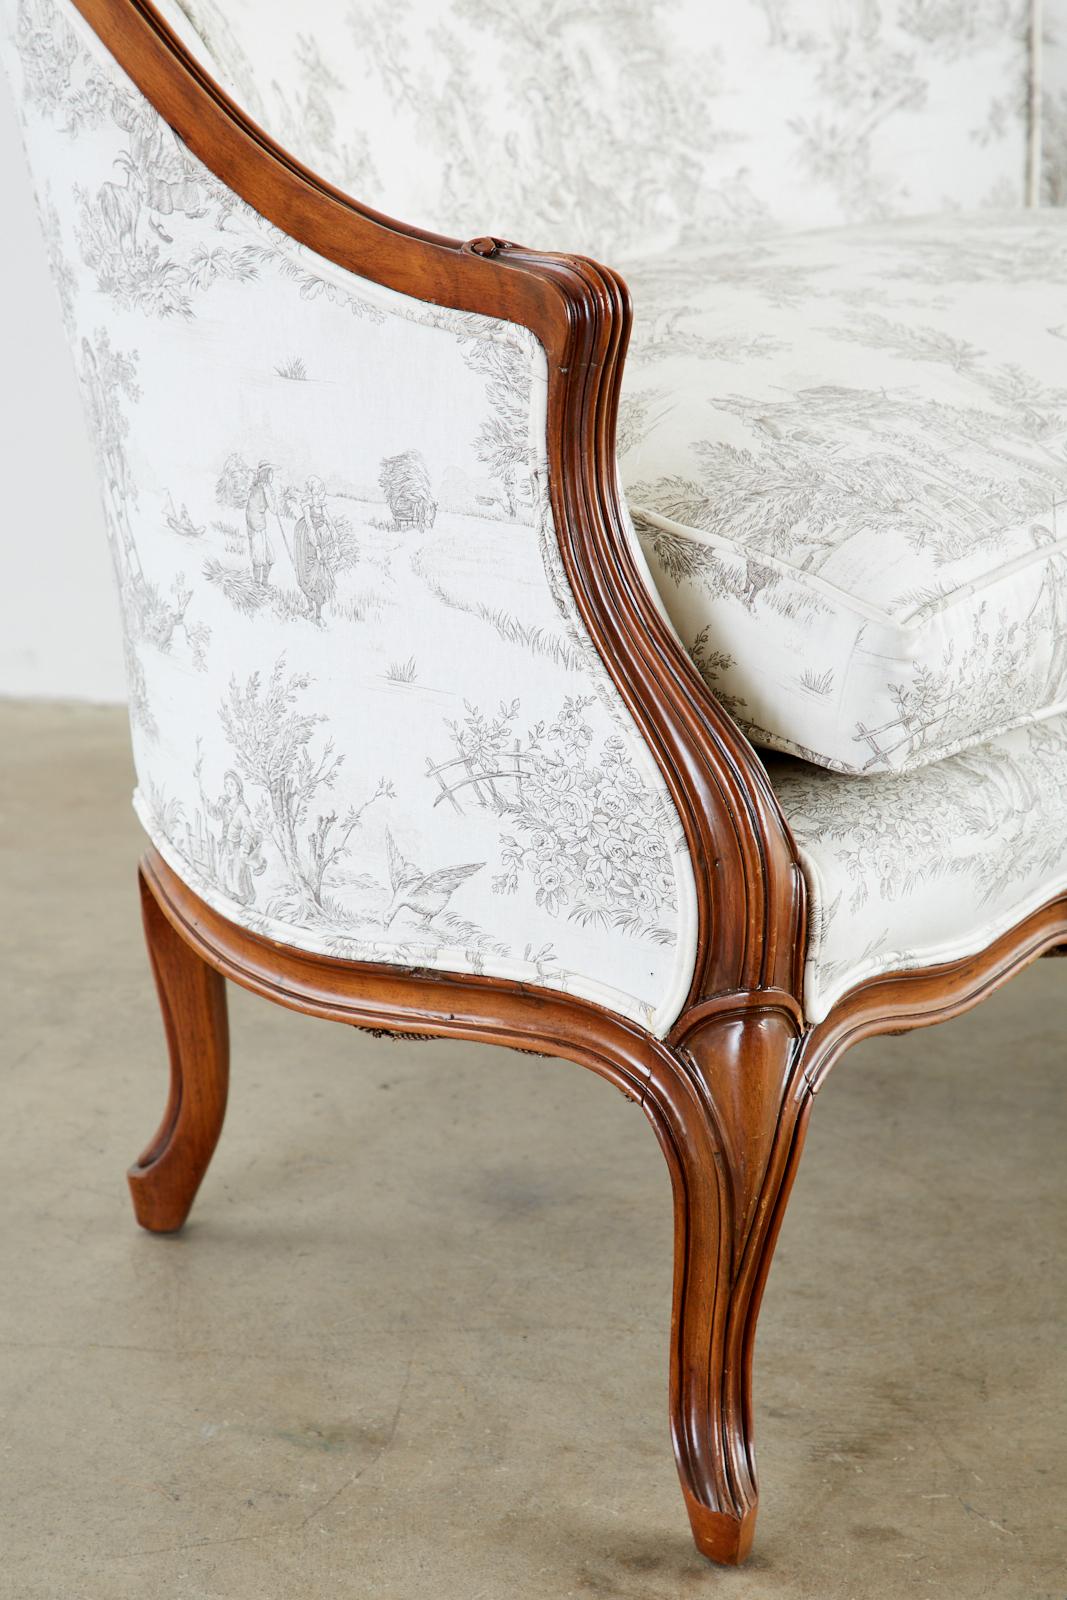 Hand-Crafted French Provincial Style Walnut Toile De Jouy Settee